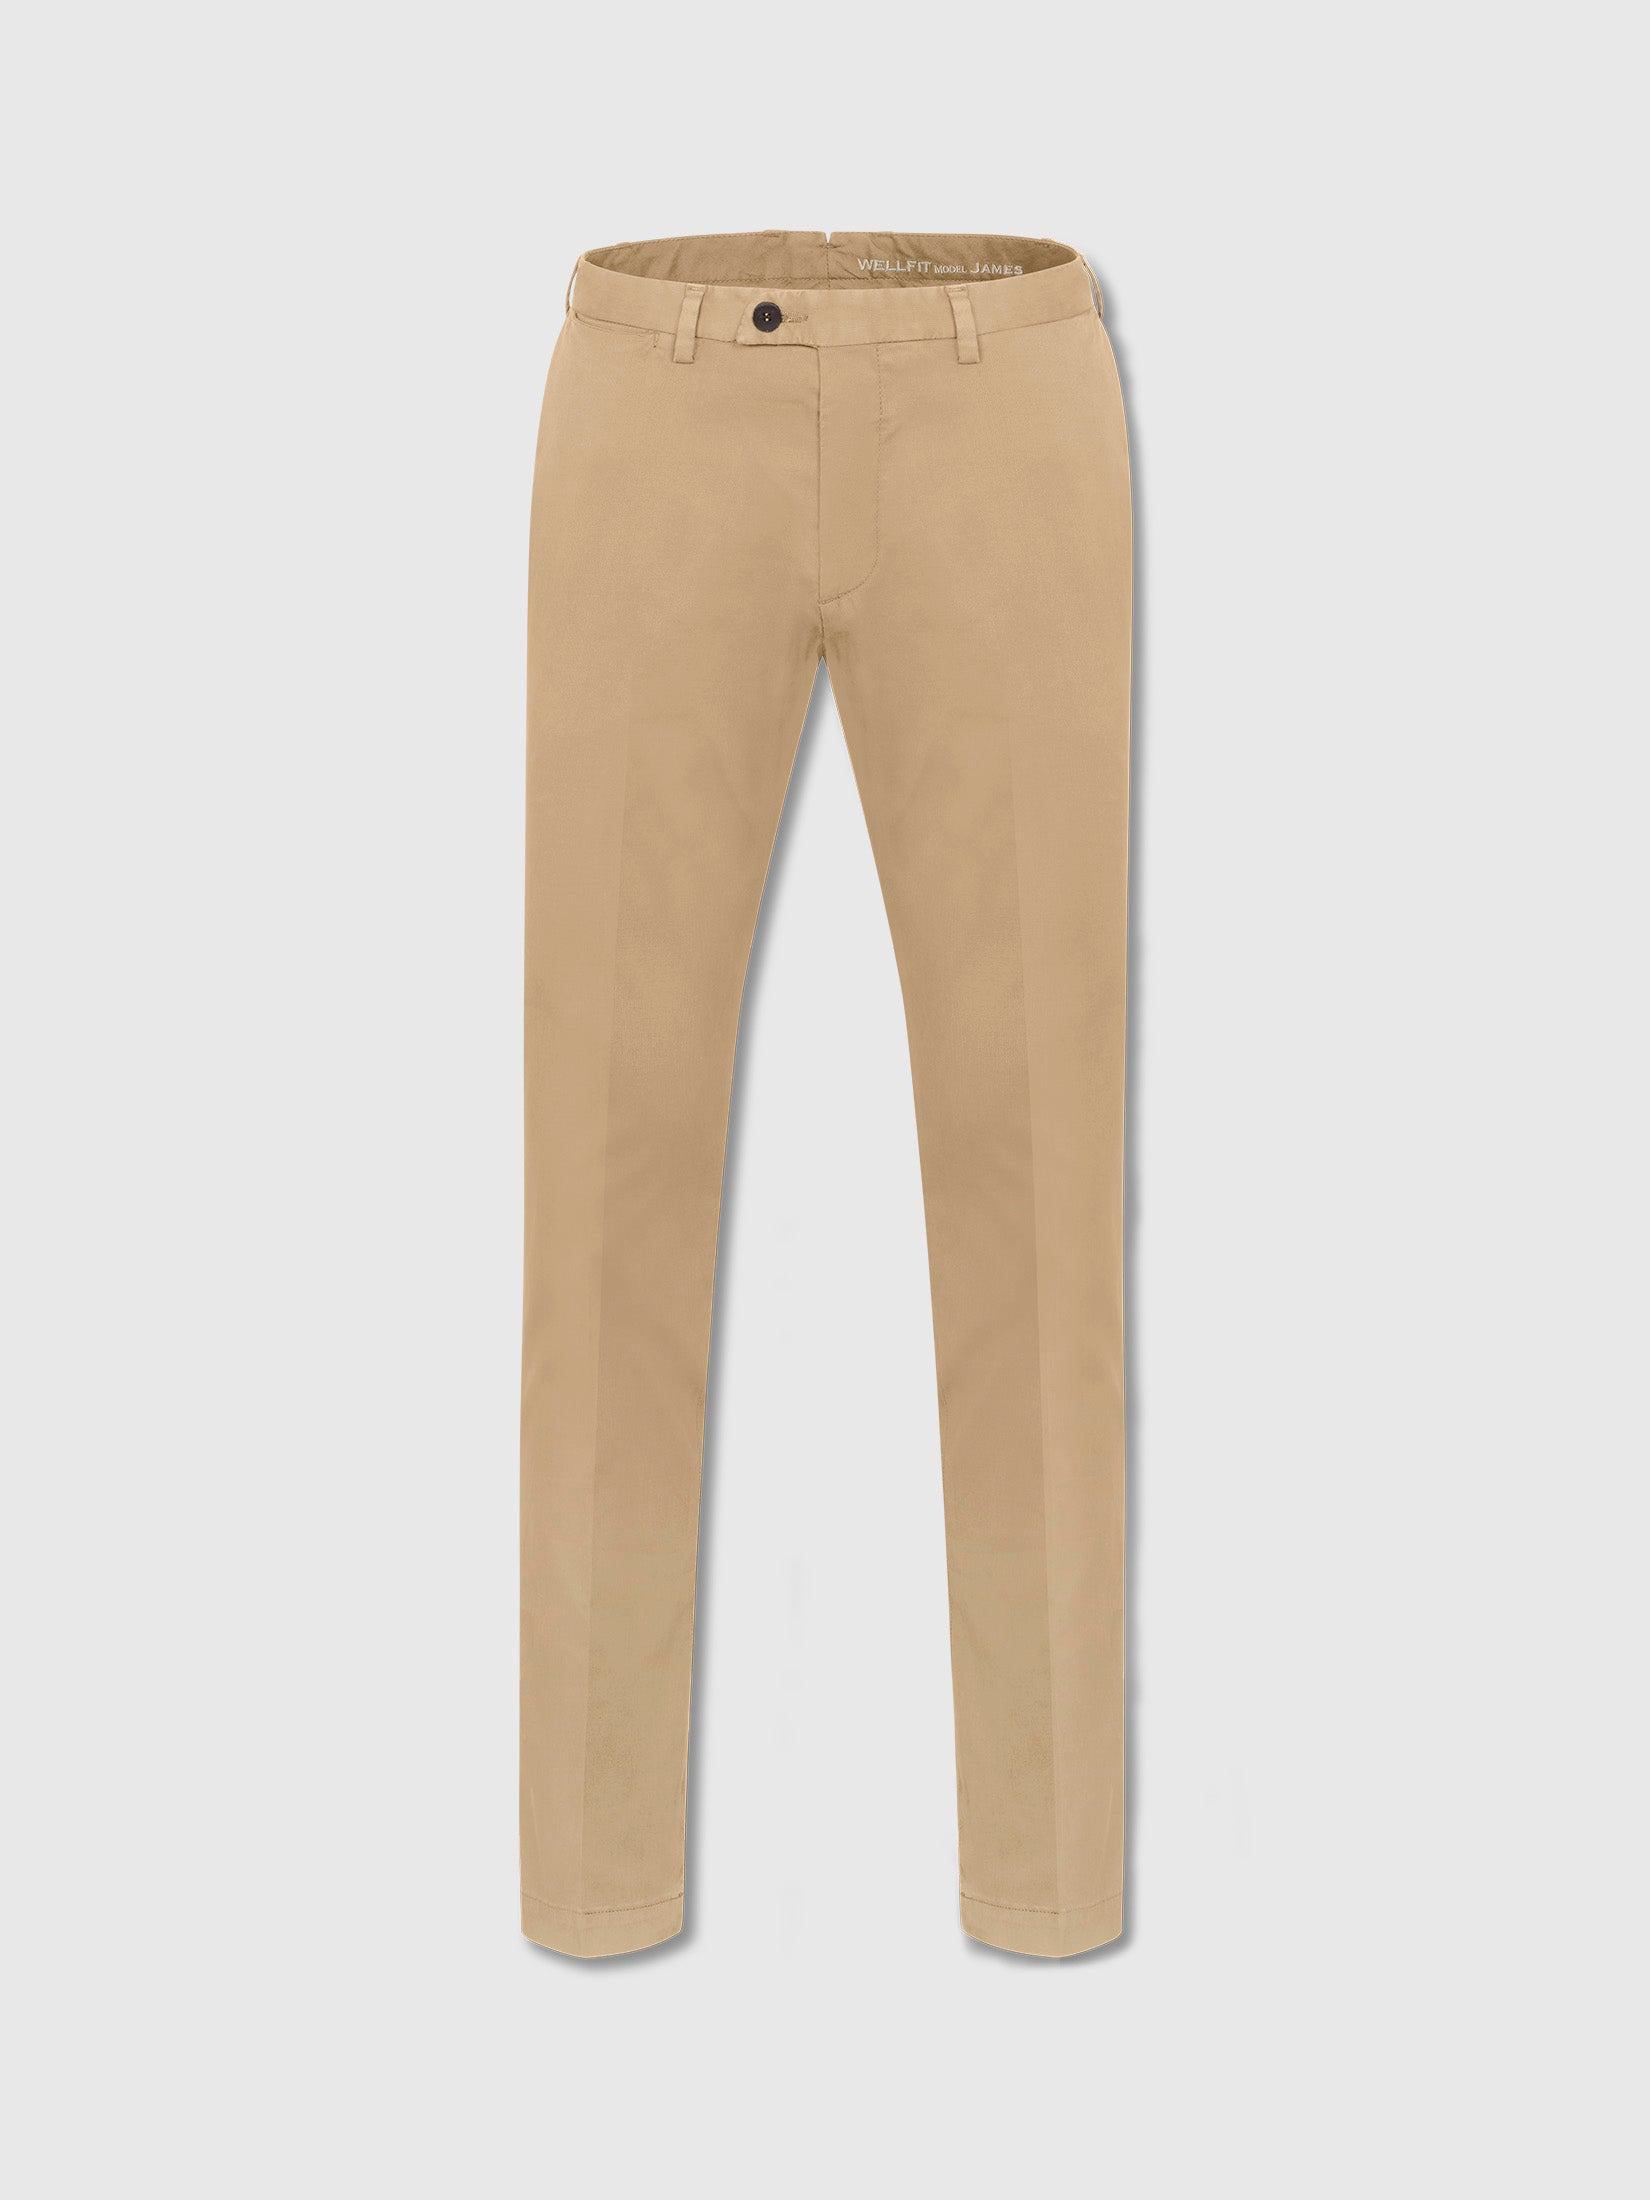 Beige Cannetté Stretchy Chino